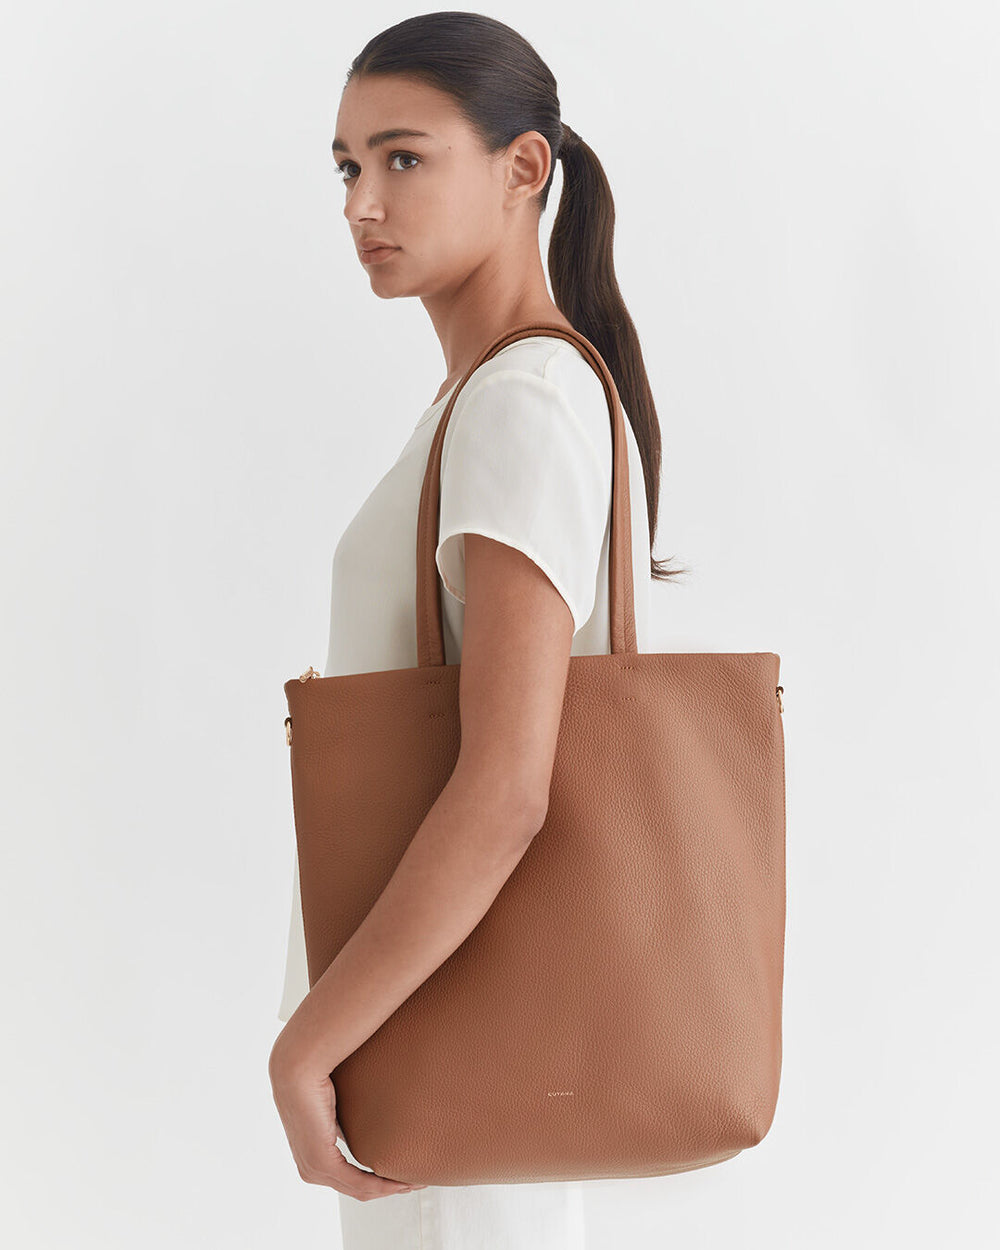 Woman carrying a large tote bag over her shoulder.